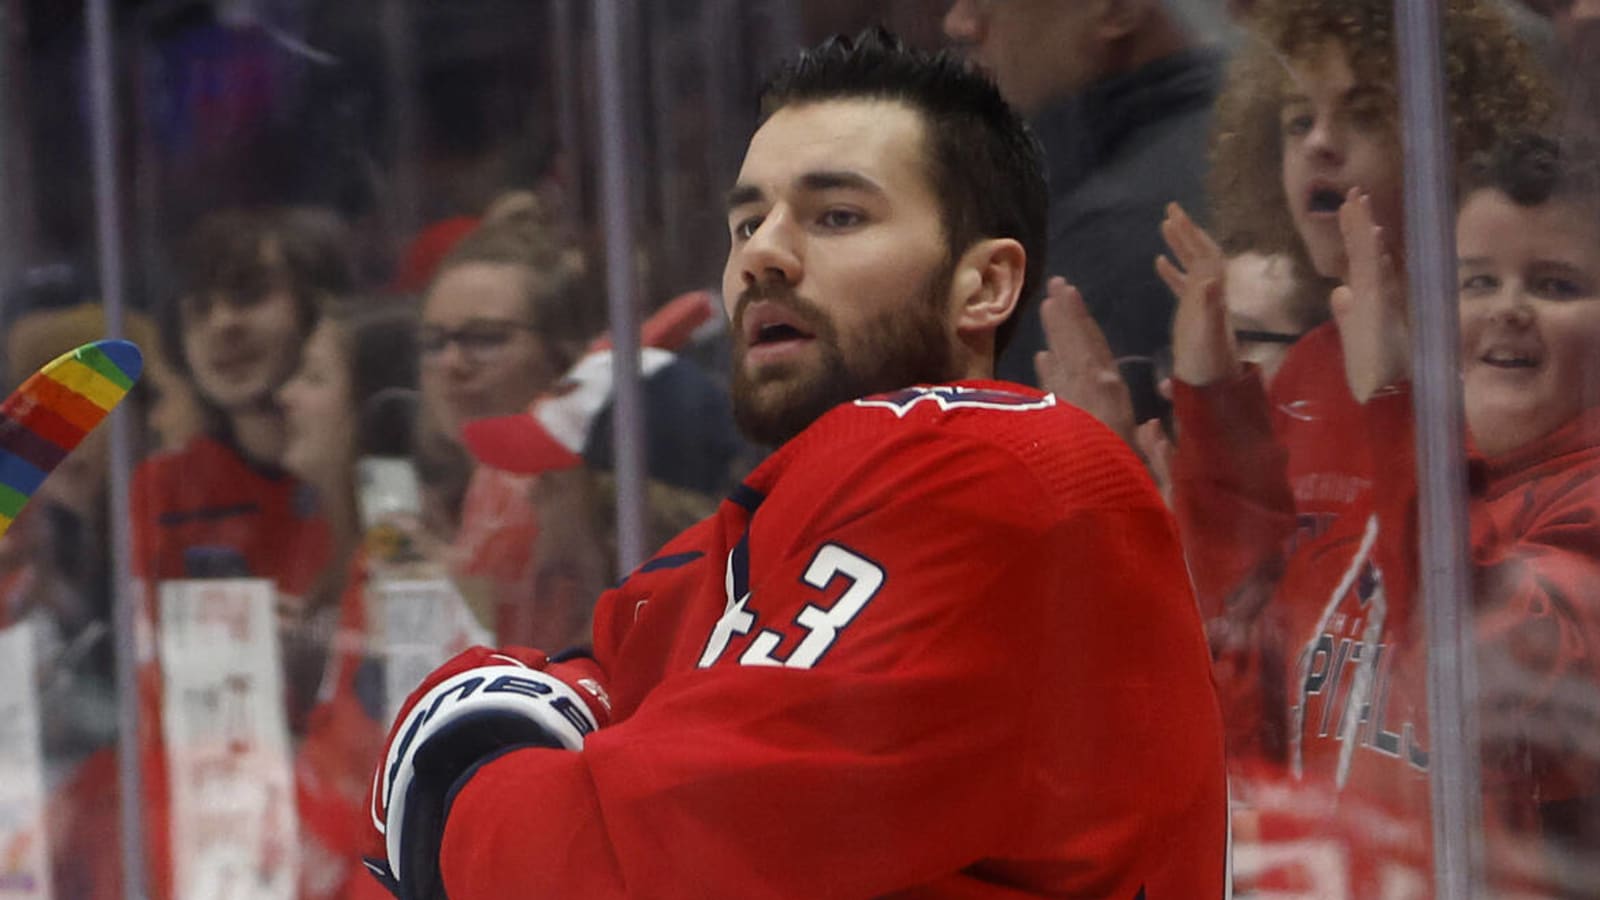 Washington Capitals right wing Tom Wilson sprays the crowd with a